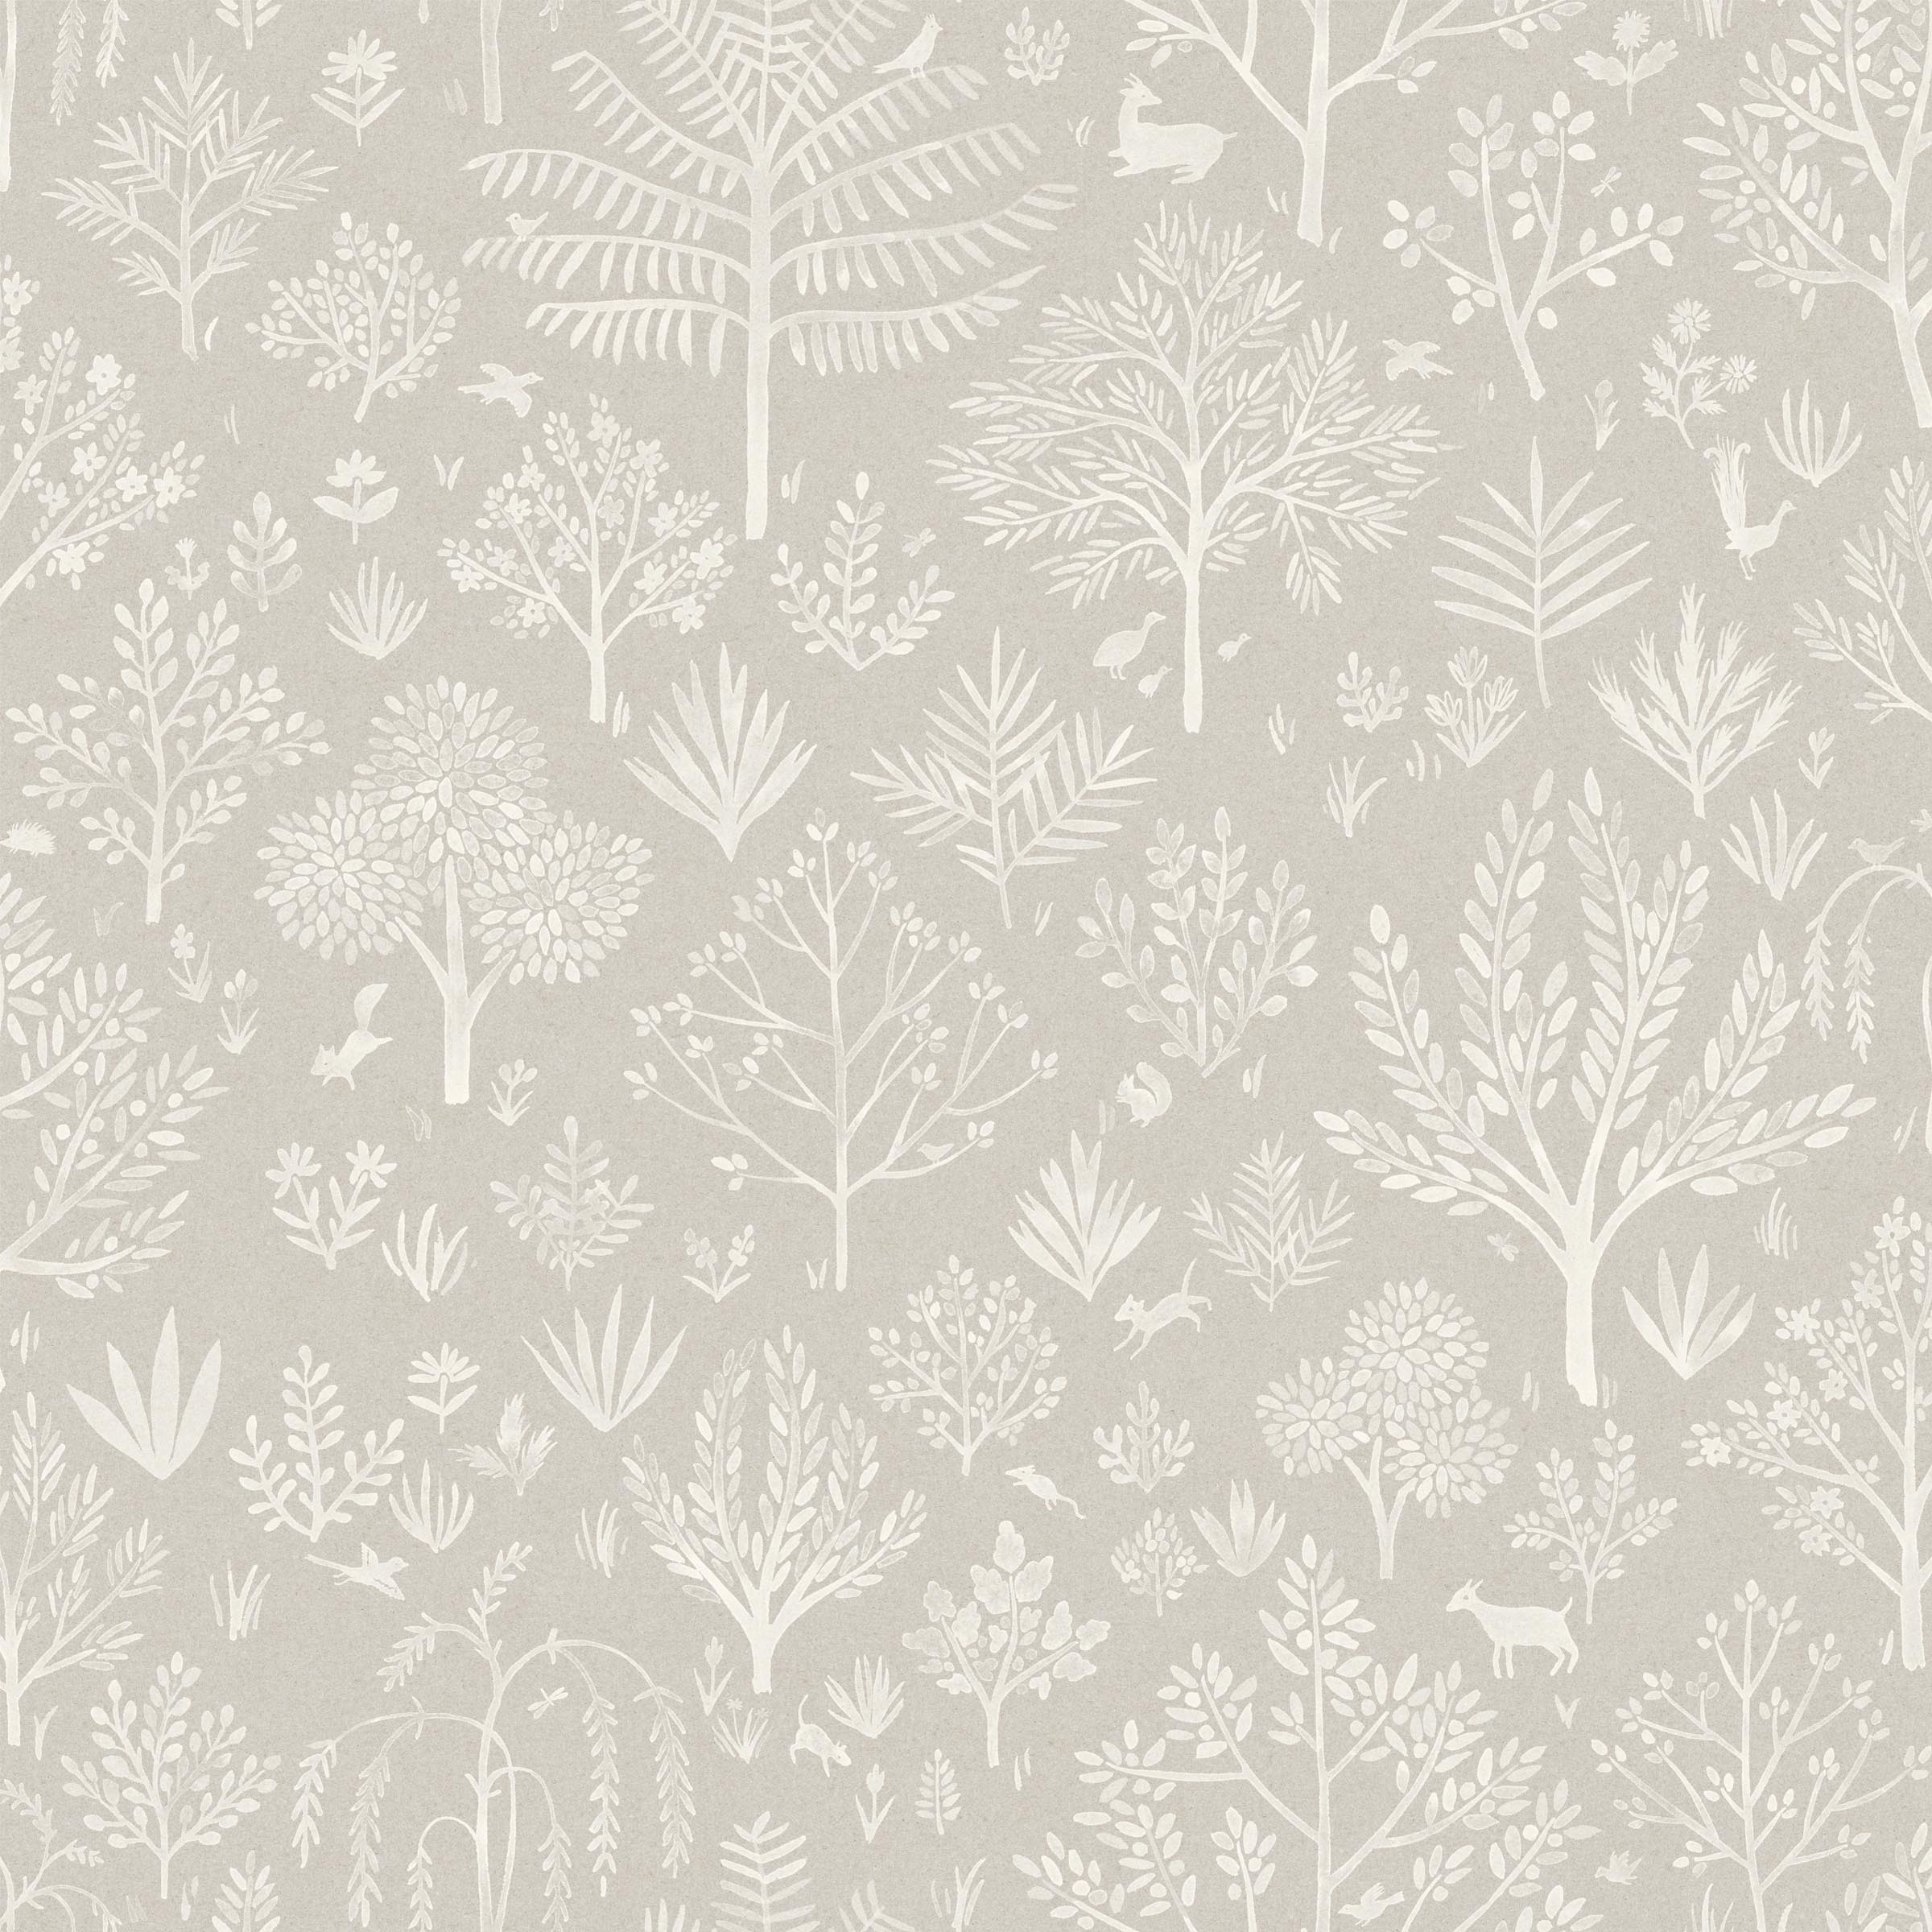 Detail of fabric in a playful animal and tree print in white on a greige field.